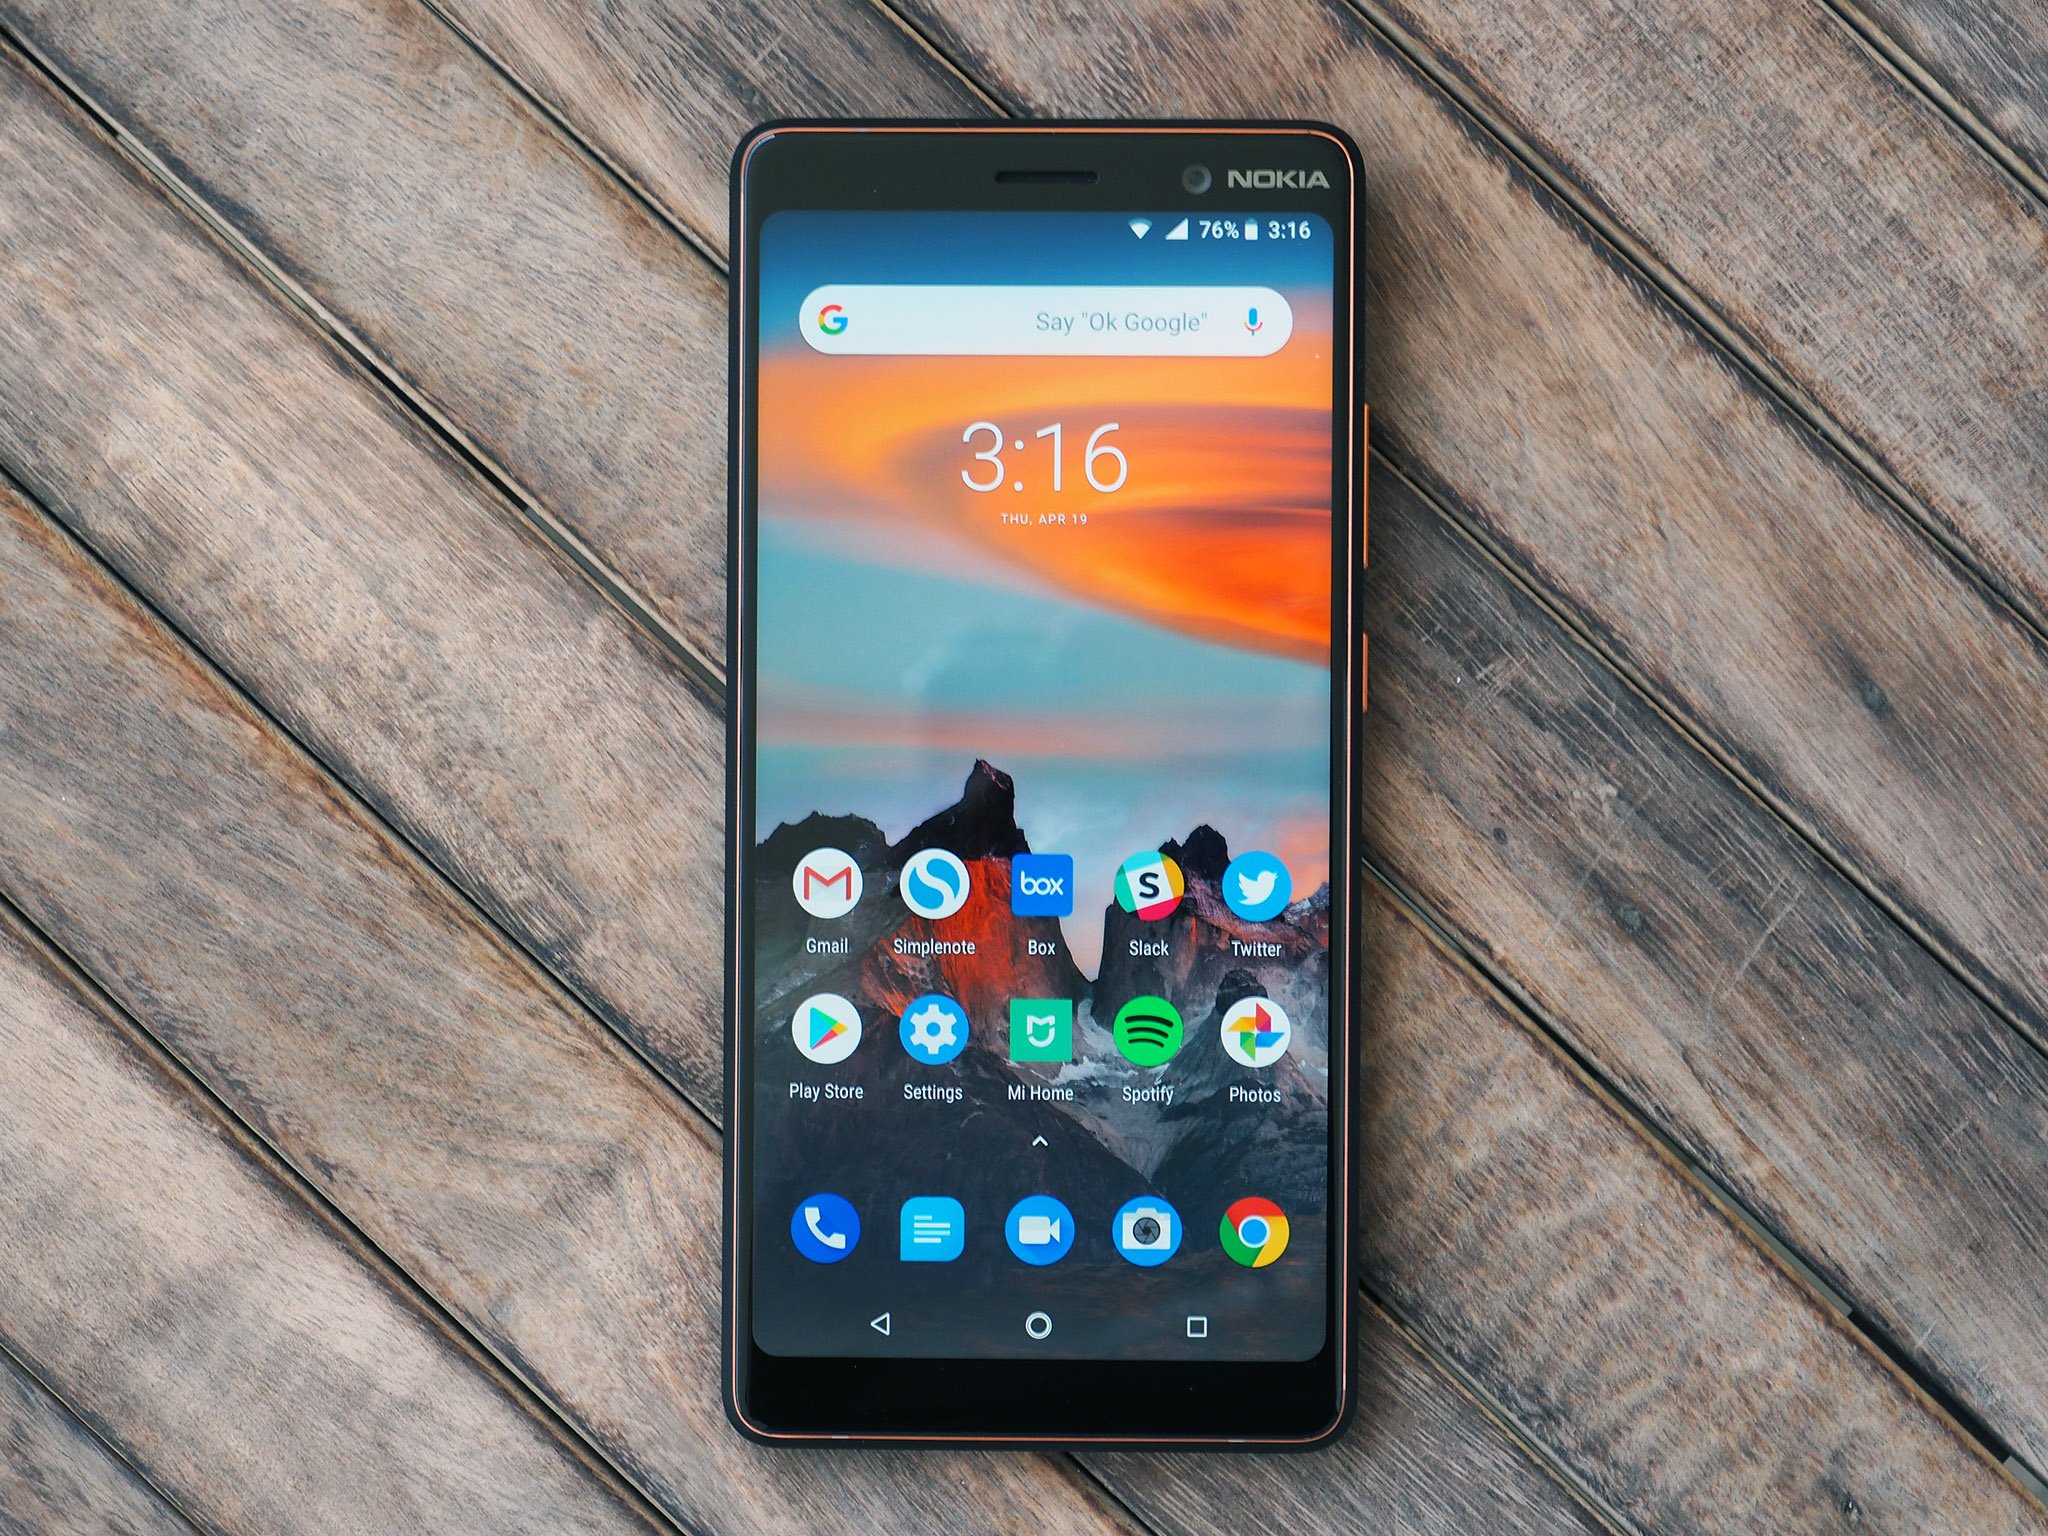 Nokia 7 Plus will receive Android 9.0 Pie stable update in September